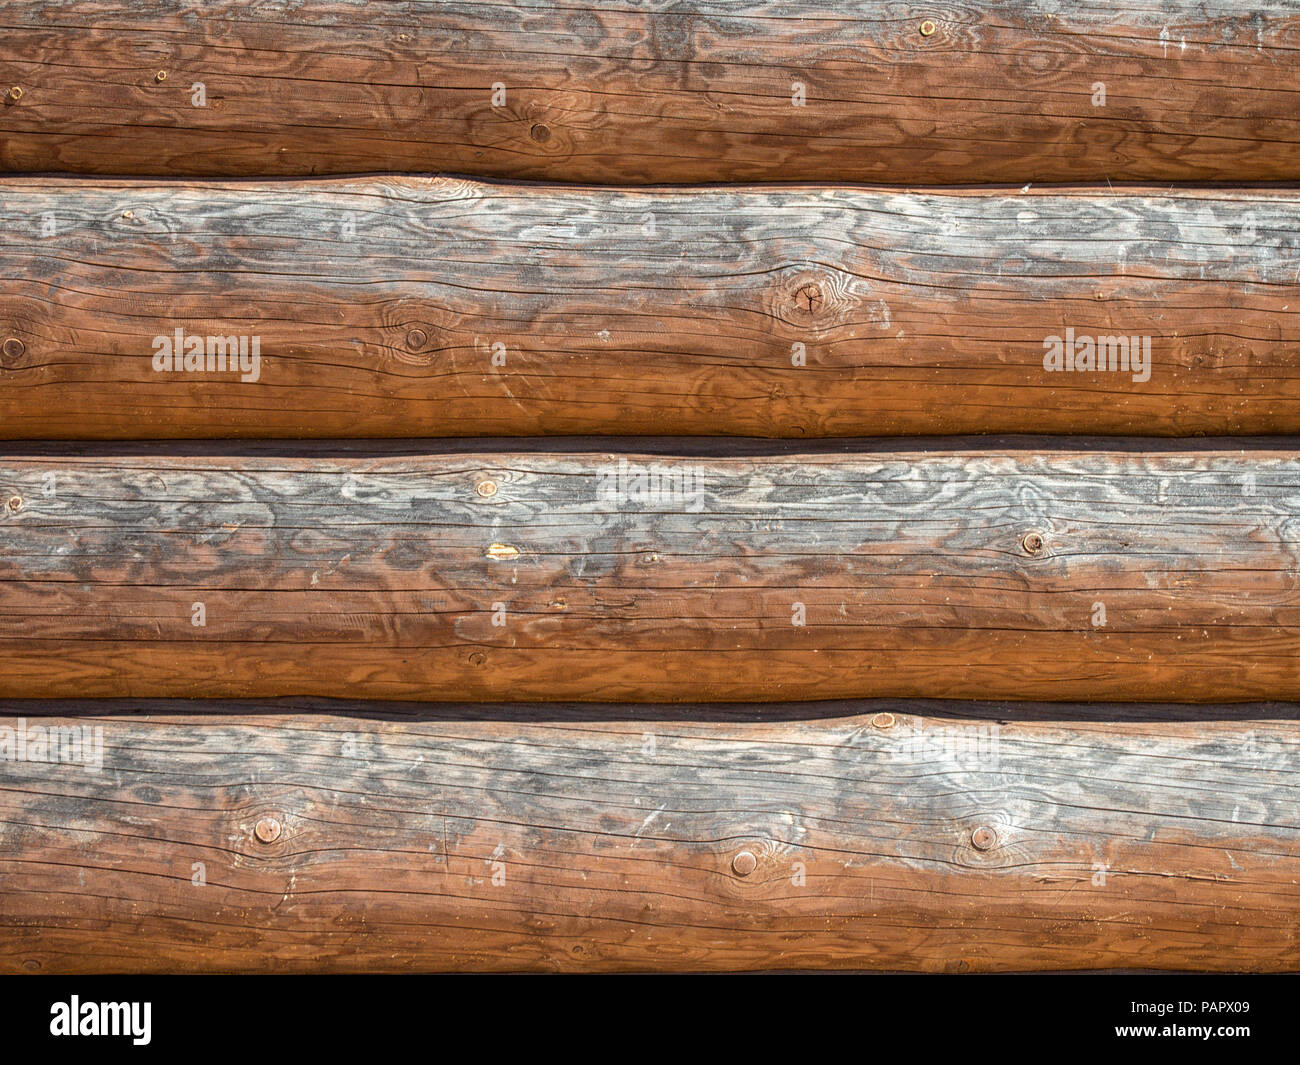 Log wall in sunny day background Stock Photo